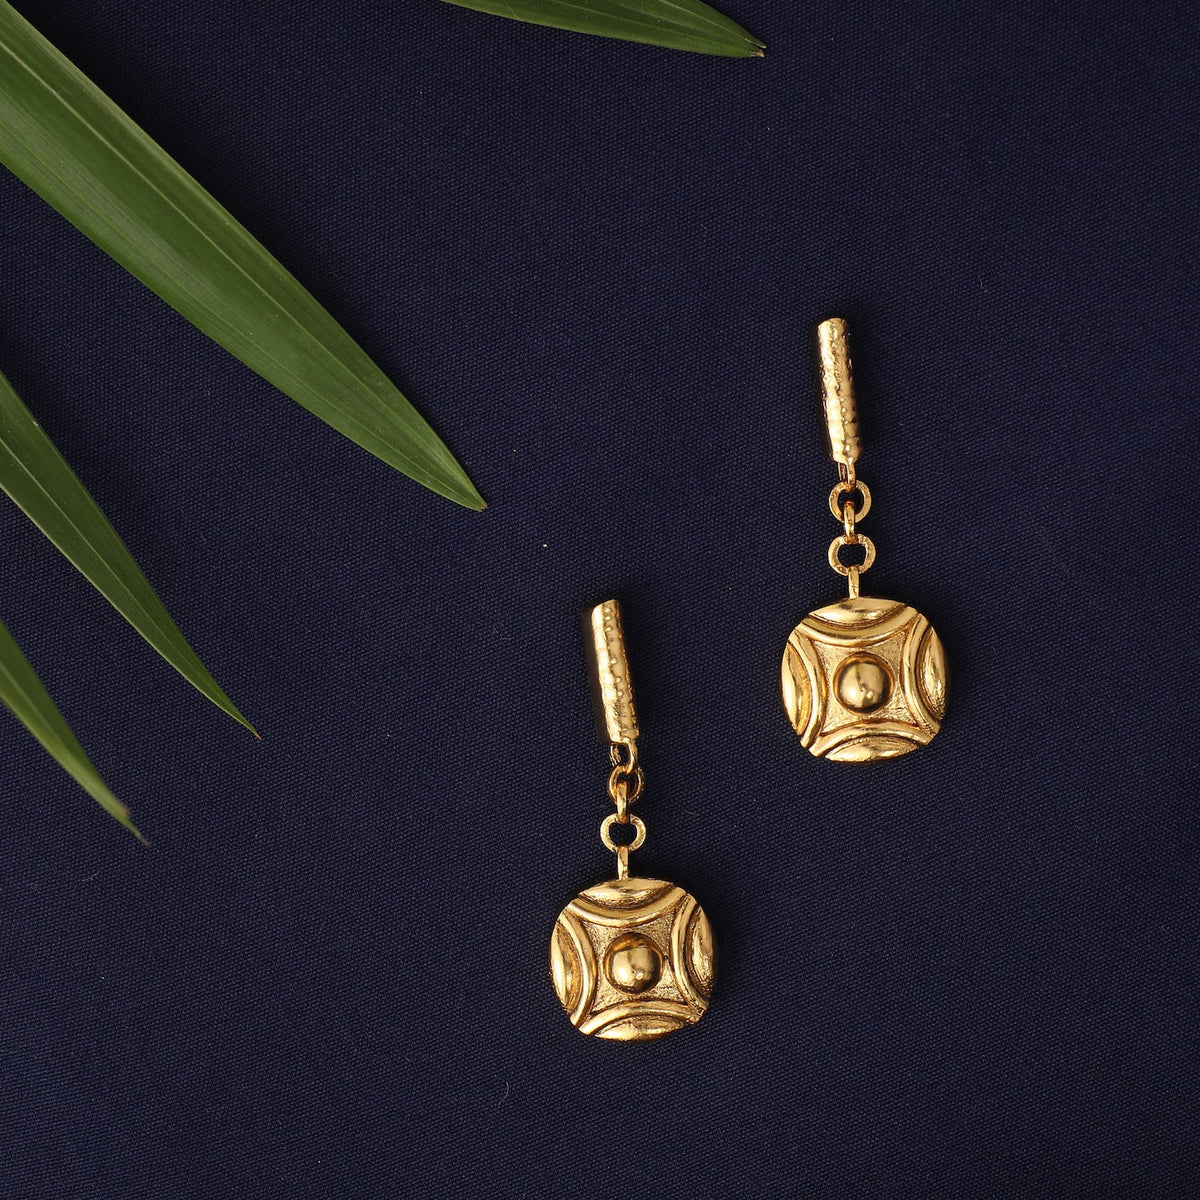 Hades Gold Plated Tribal Earrings